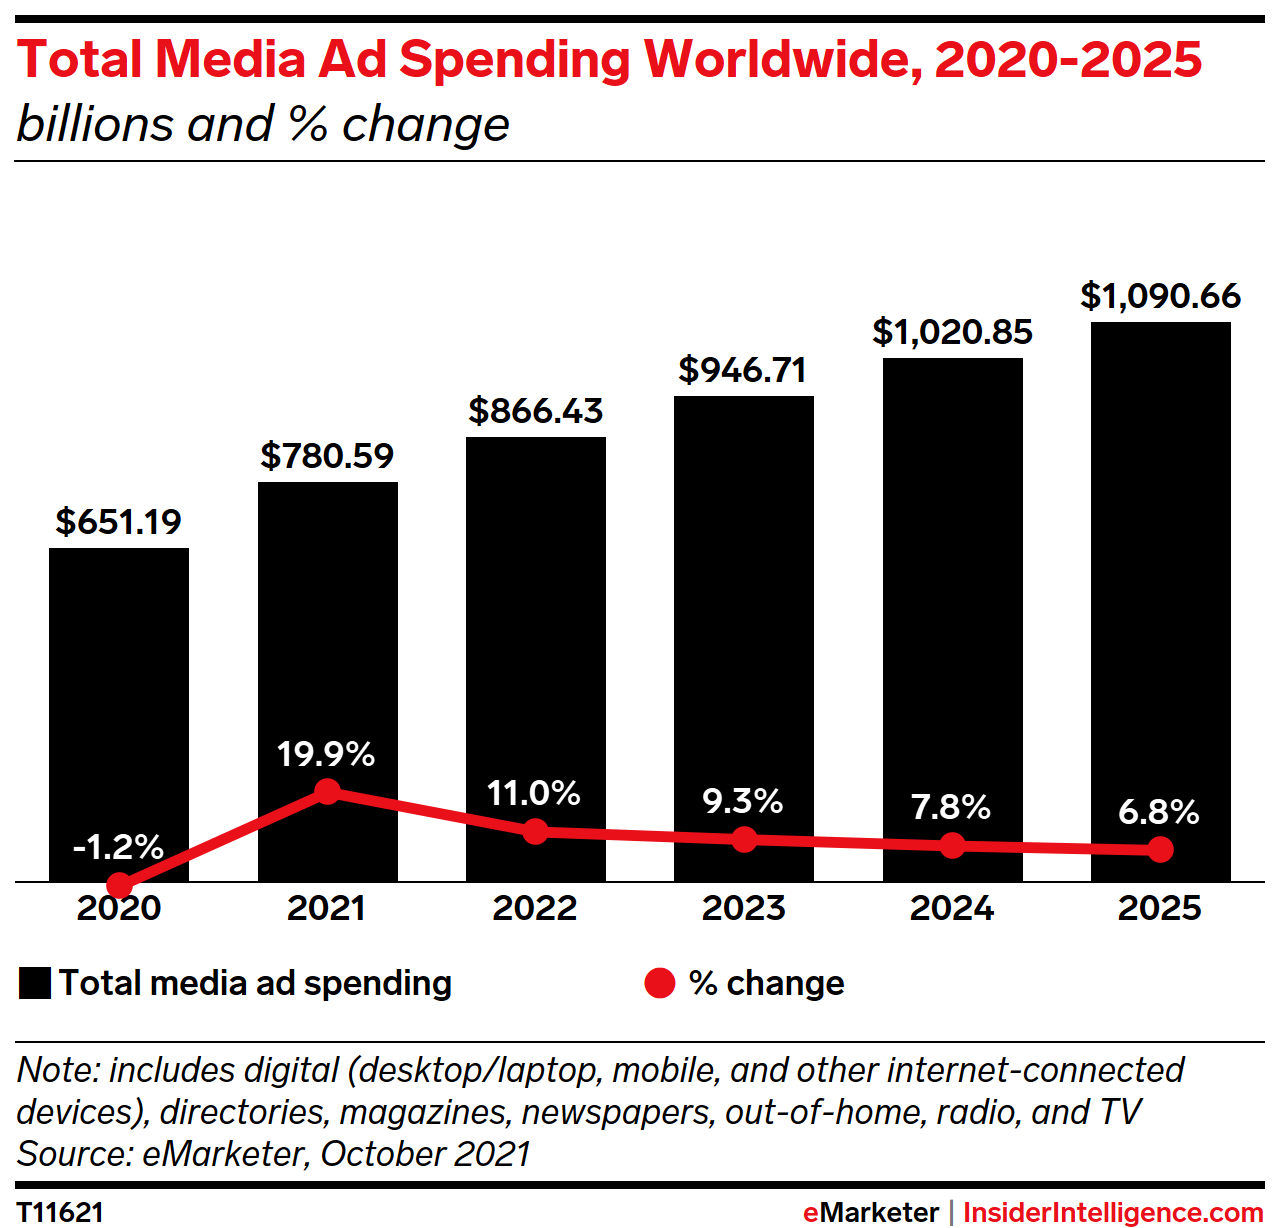 Total Media Ad Spending Worldwide, 2020-2025 (billions and % change)